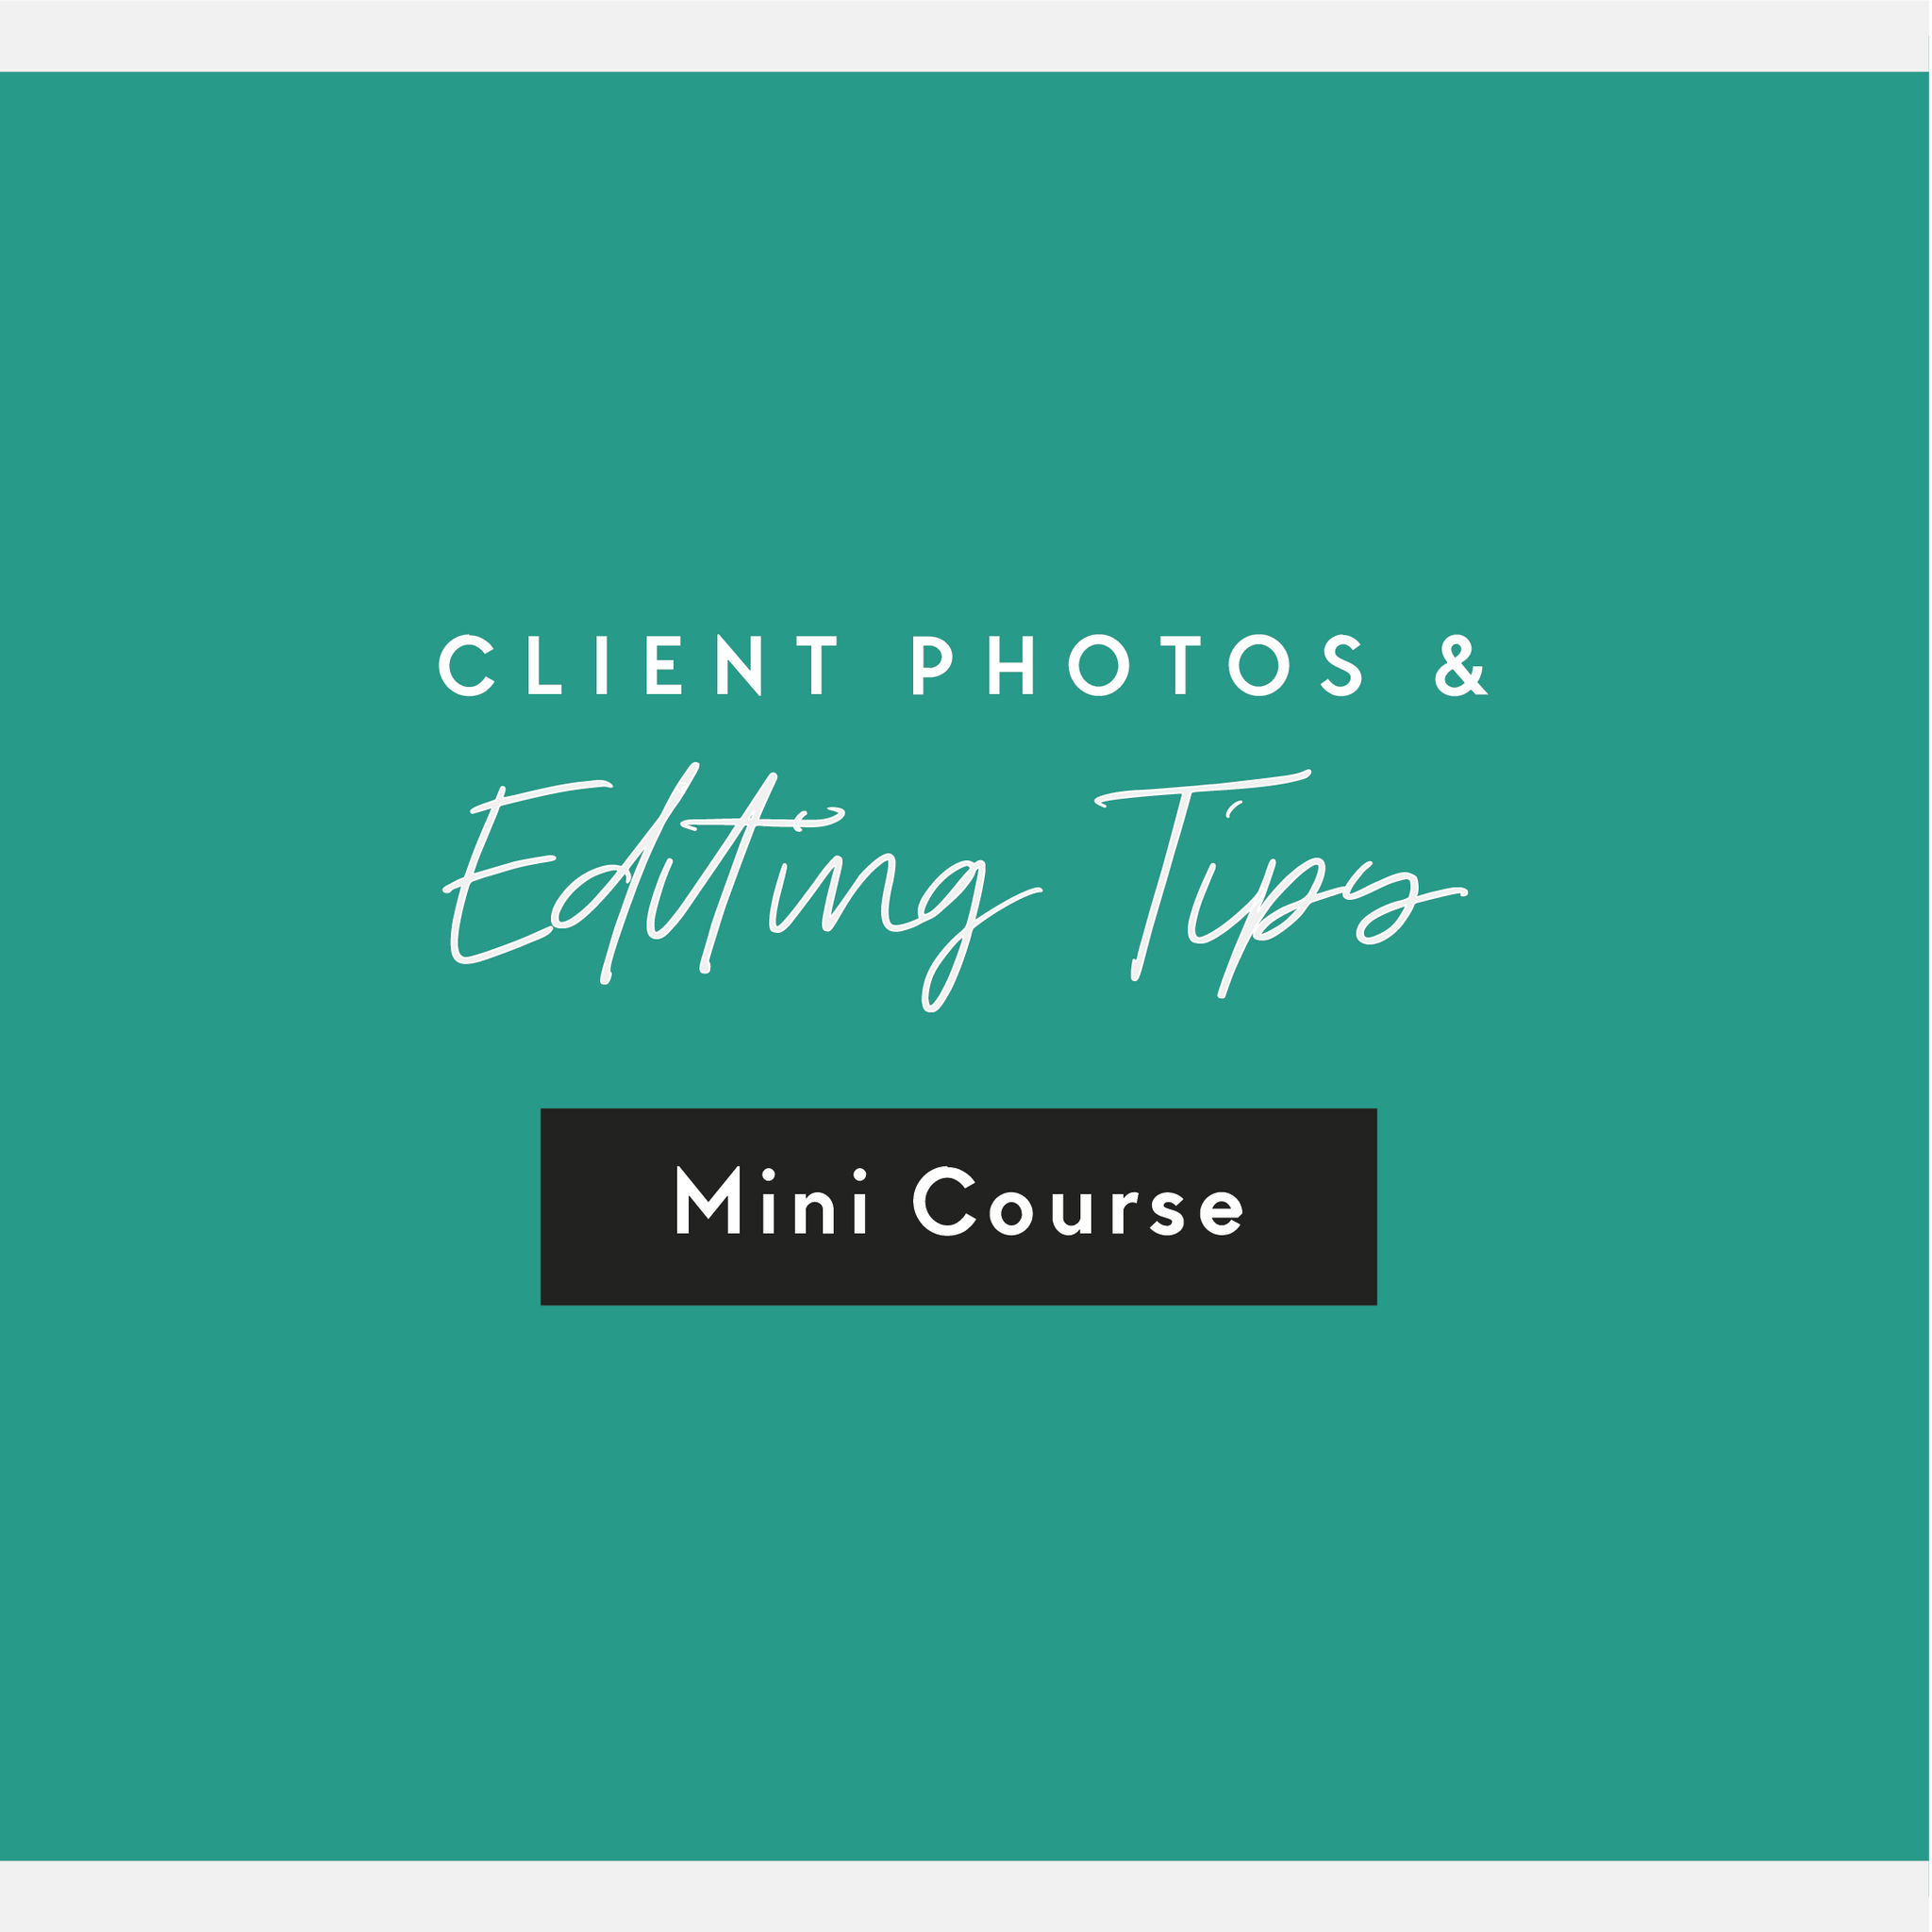 Client photos and editing tips.